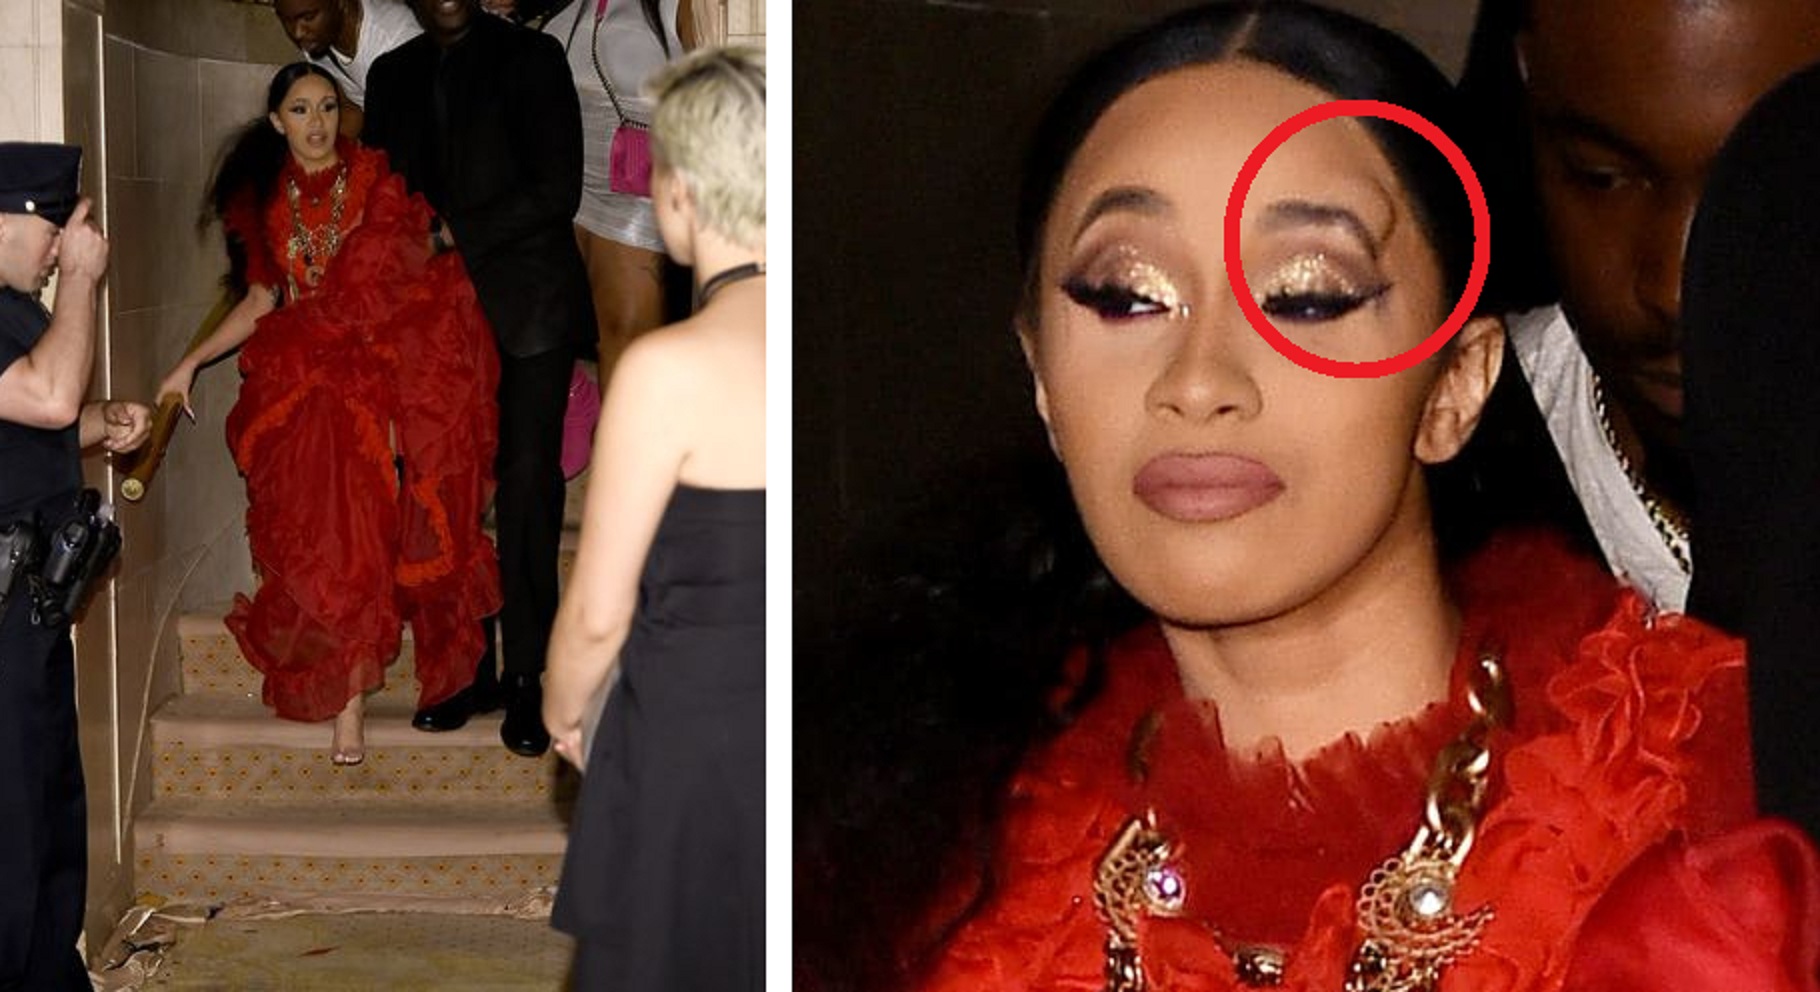 Cardi B threw her shoe at Nicki Minaj as the two get into MAJOR fight at Plaza Hotel.